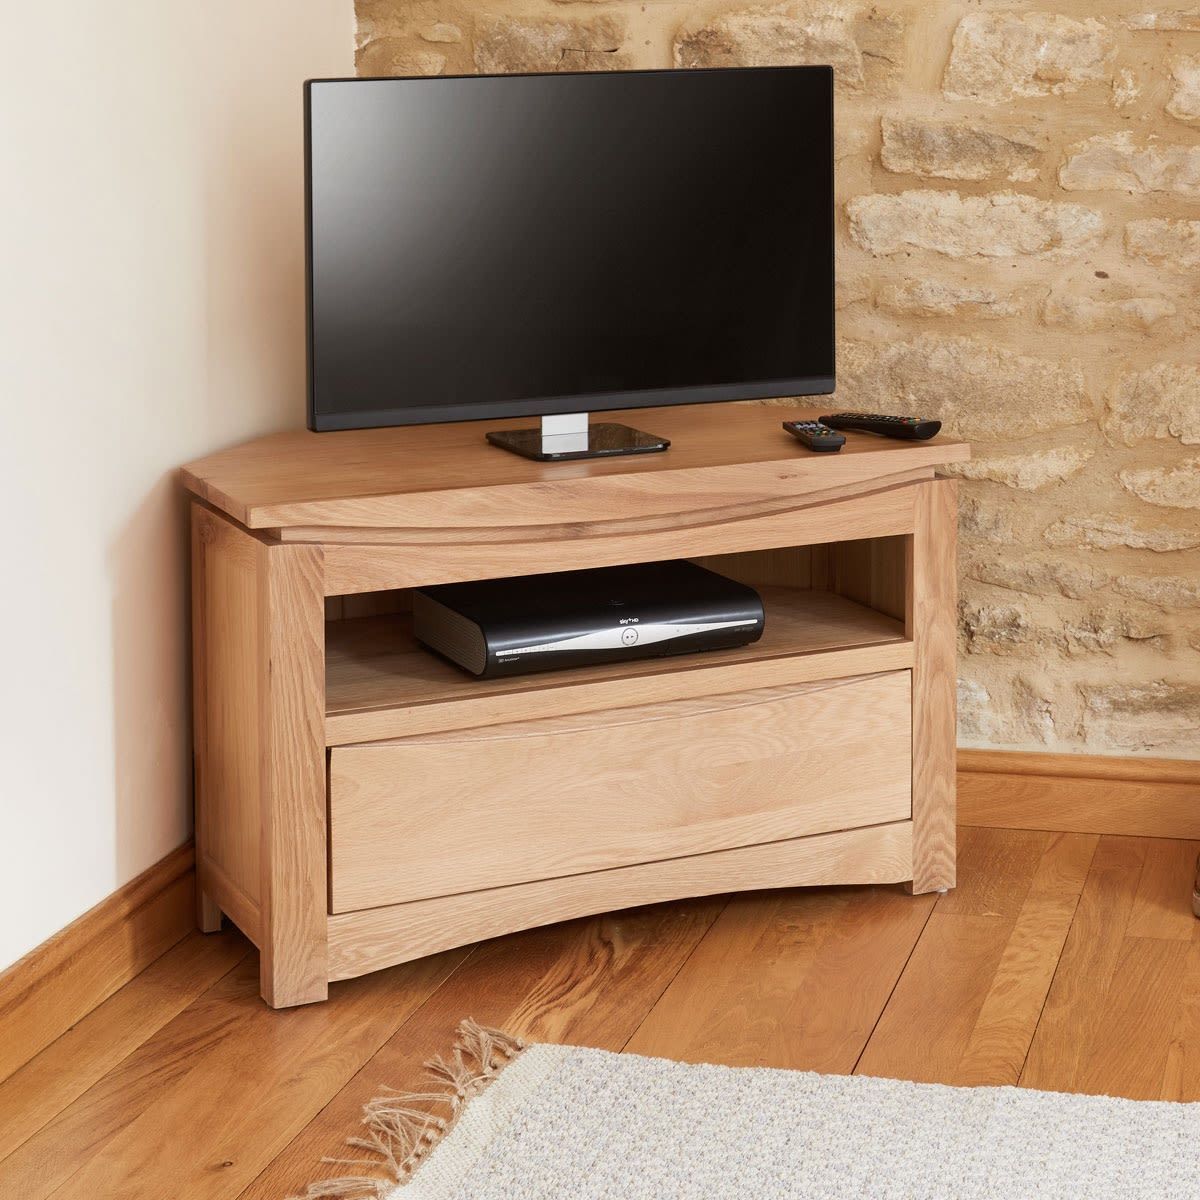 Roscoe Contemporary Oak Corner Television Cabinet | Wooden Within Low Corner Tv Cabinets (View 10 of 15)